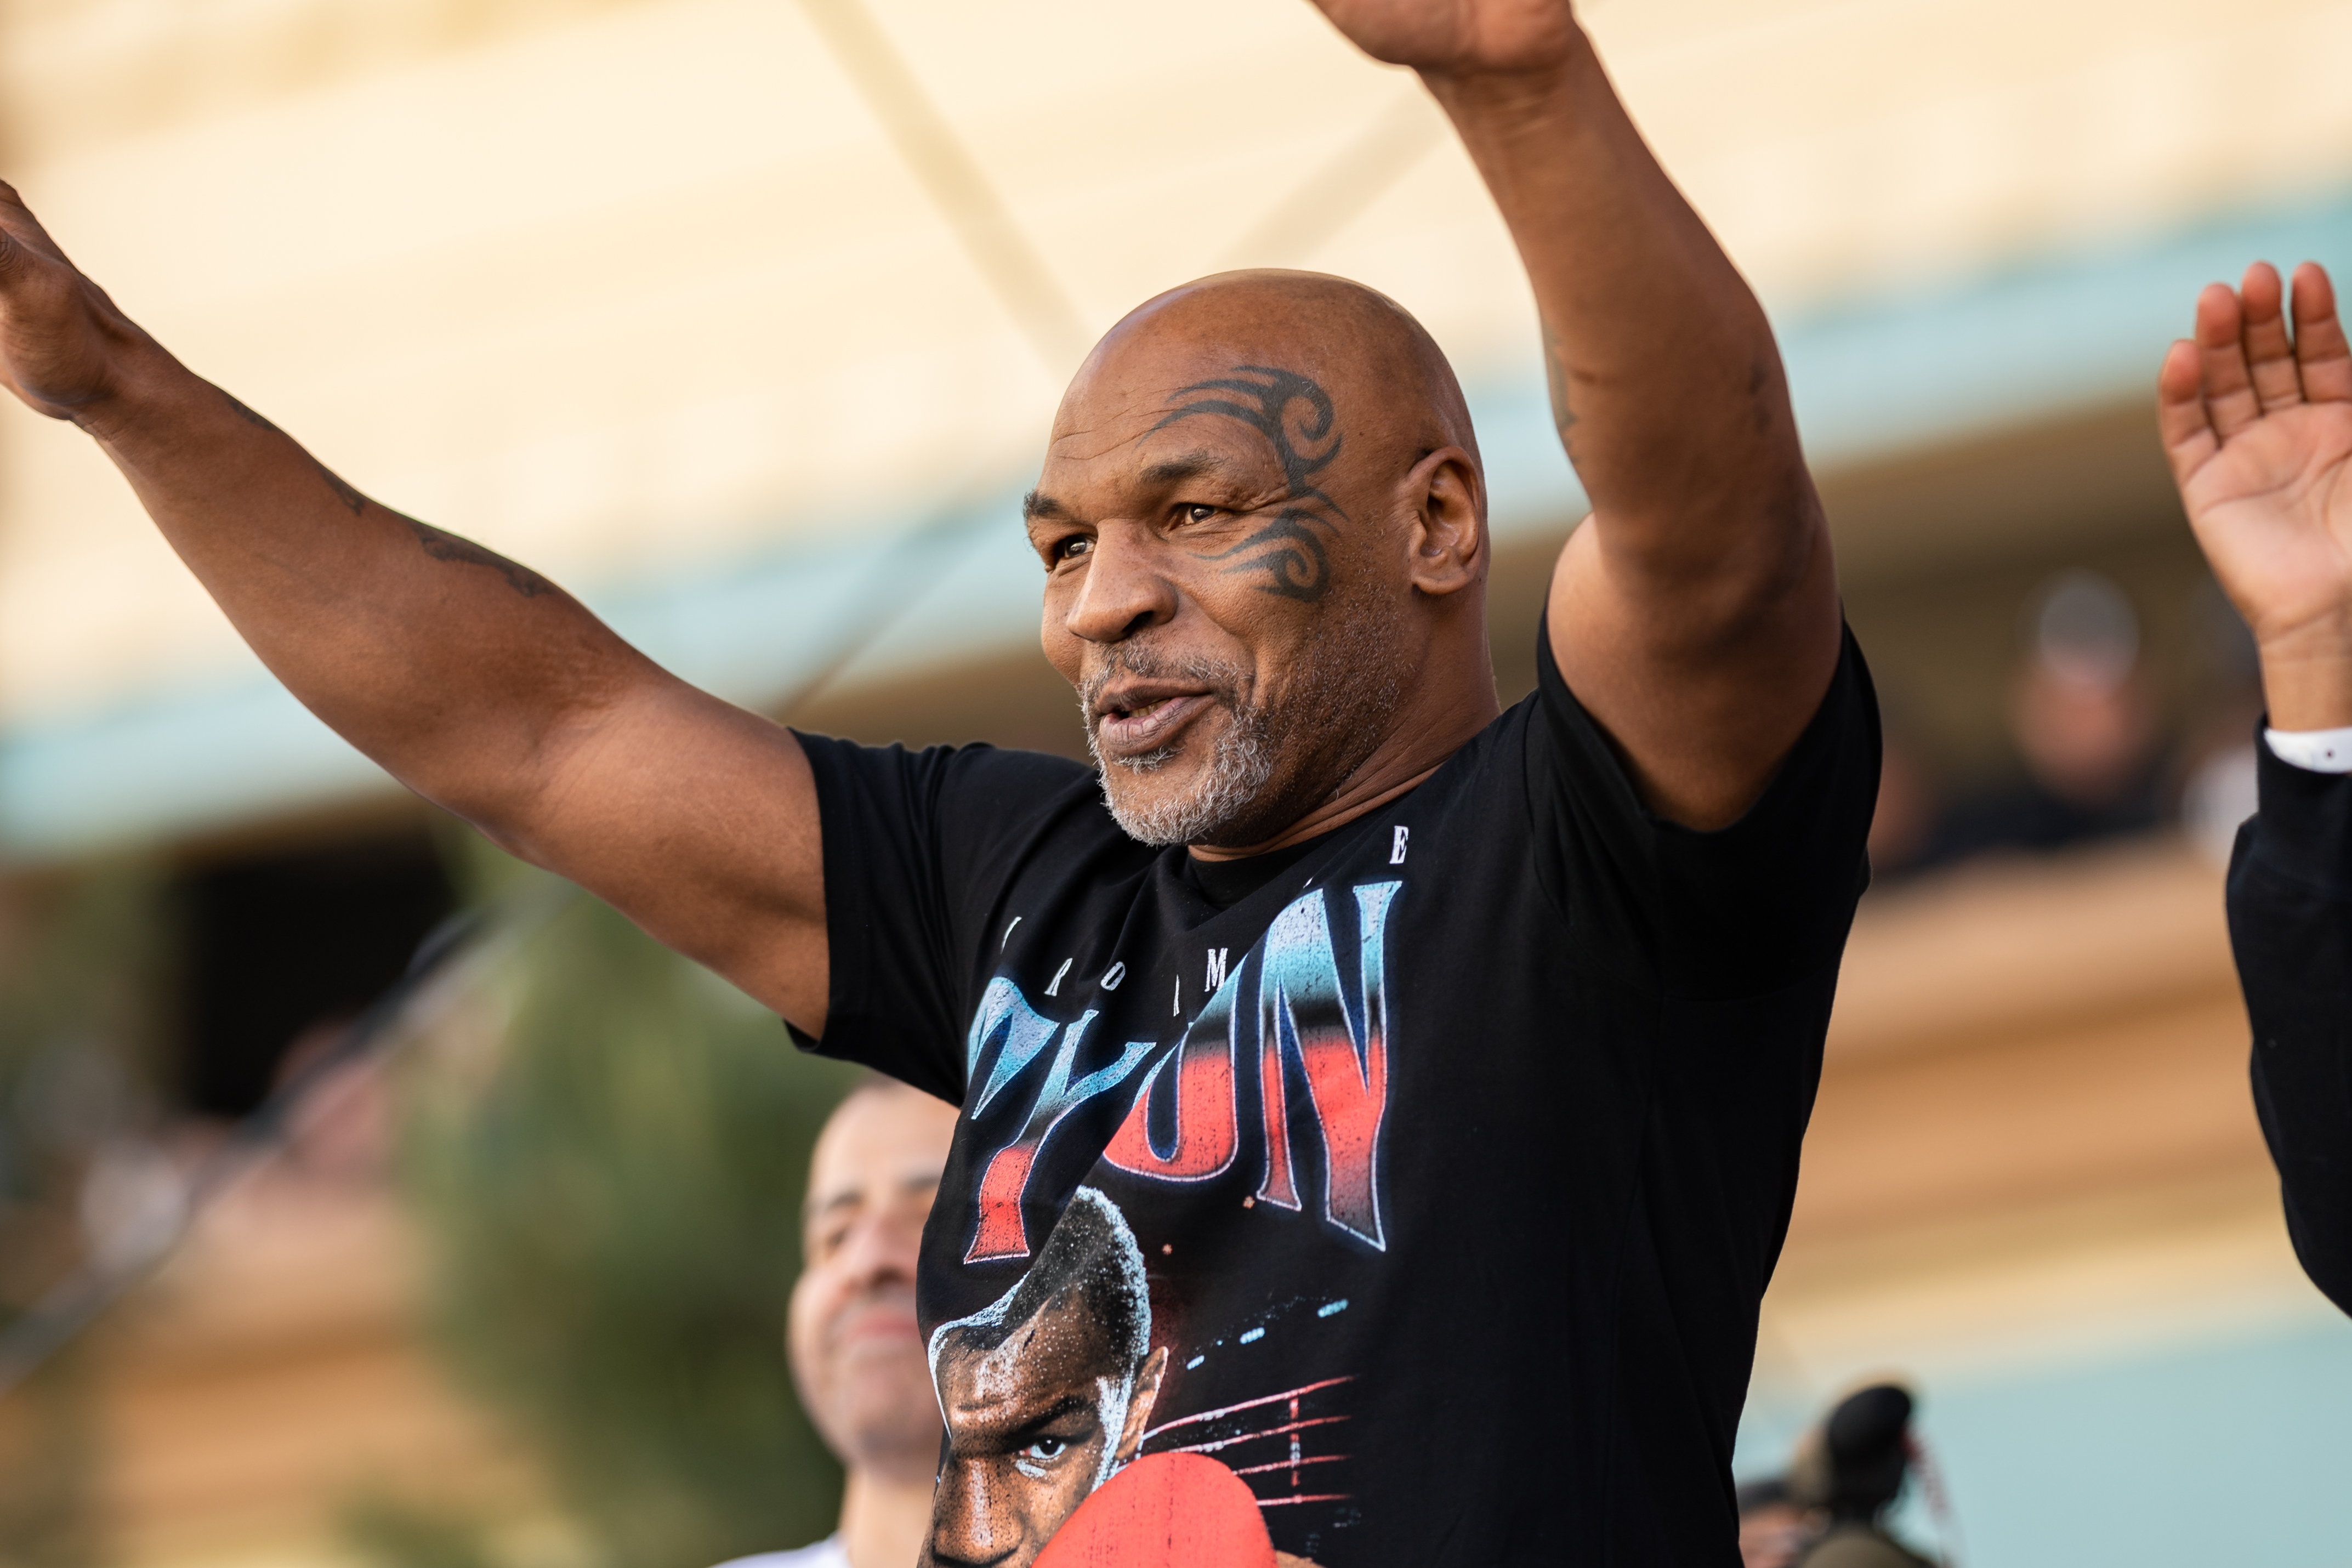 Mike Tyson: Fulton vs. Inoue will be an amazing fight